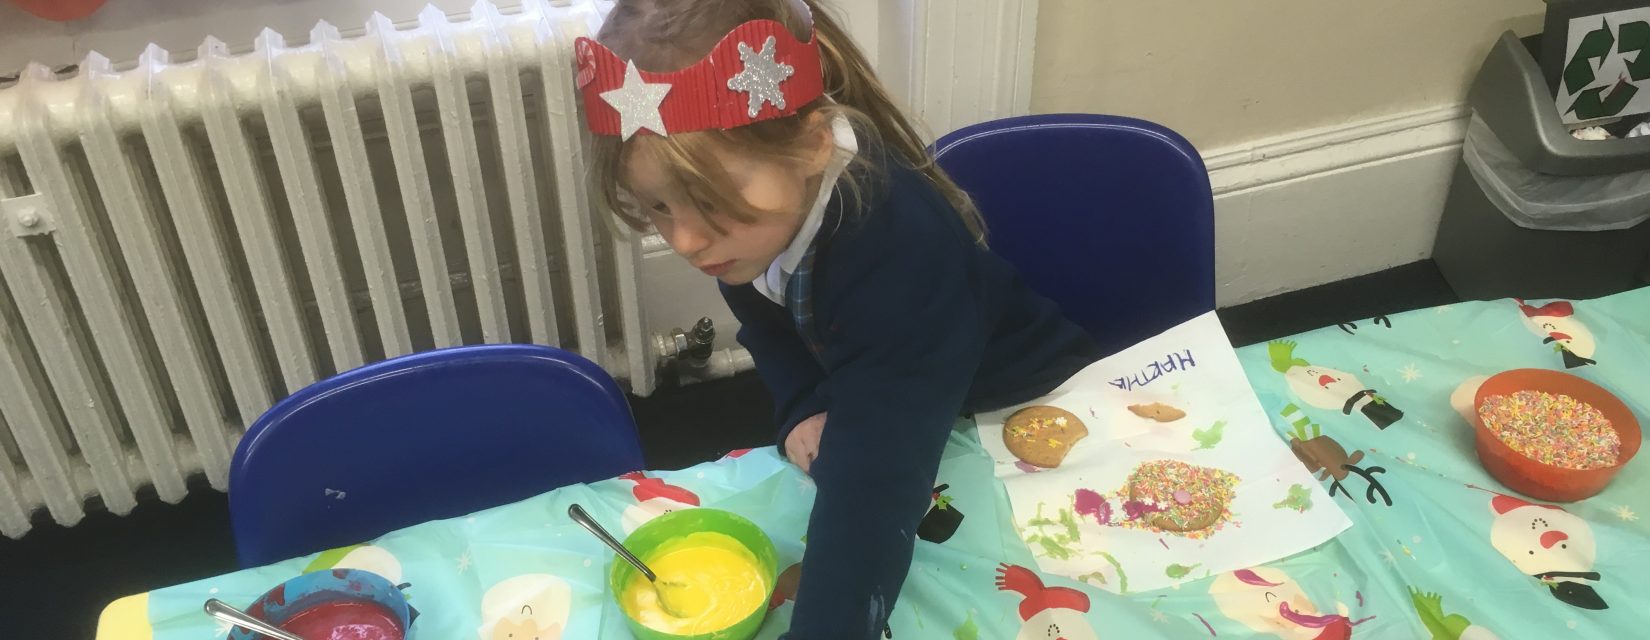 Young girl making cookies with different toppings